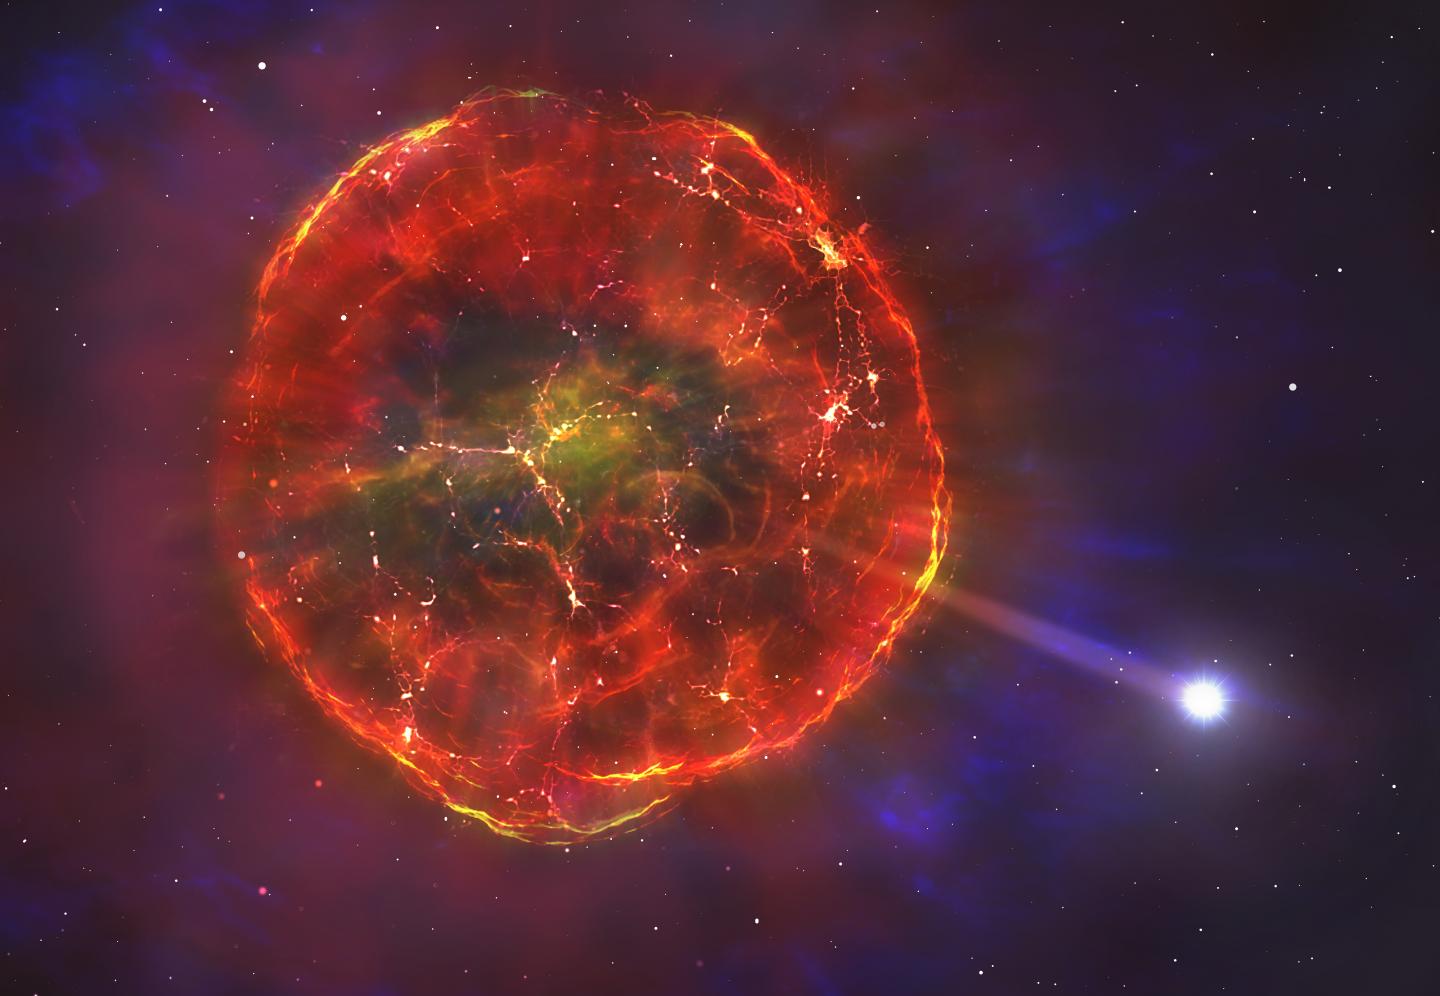 The Material Ejected by the Supernova